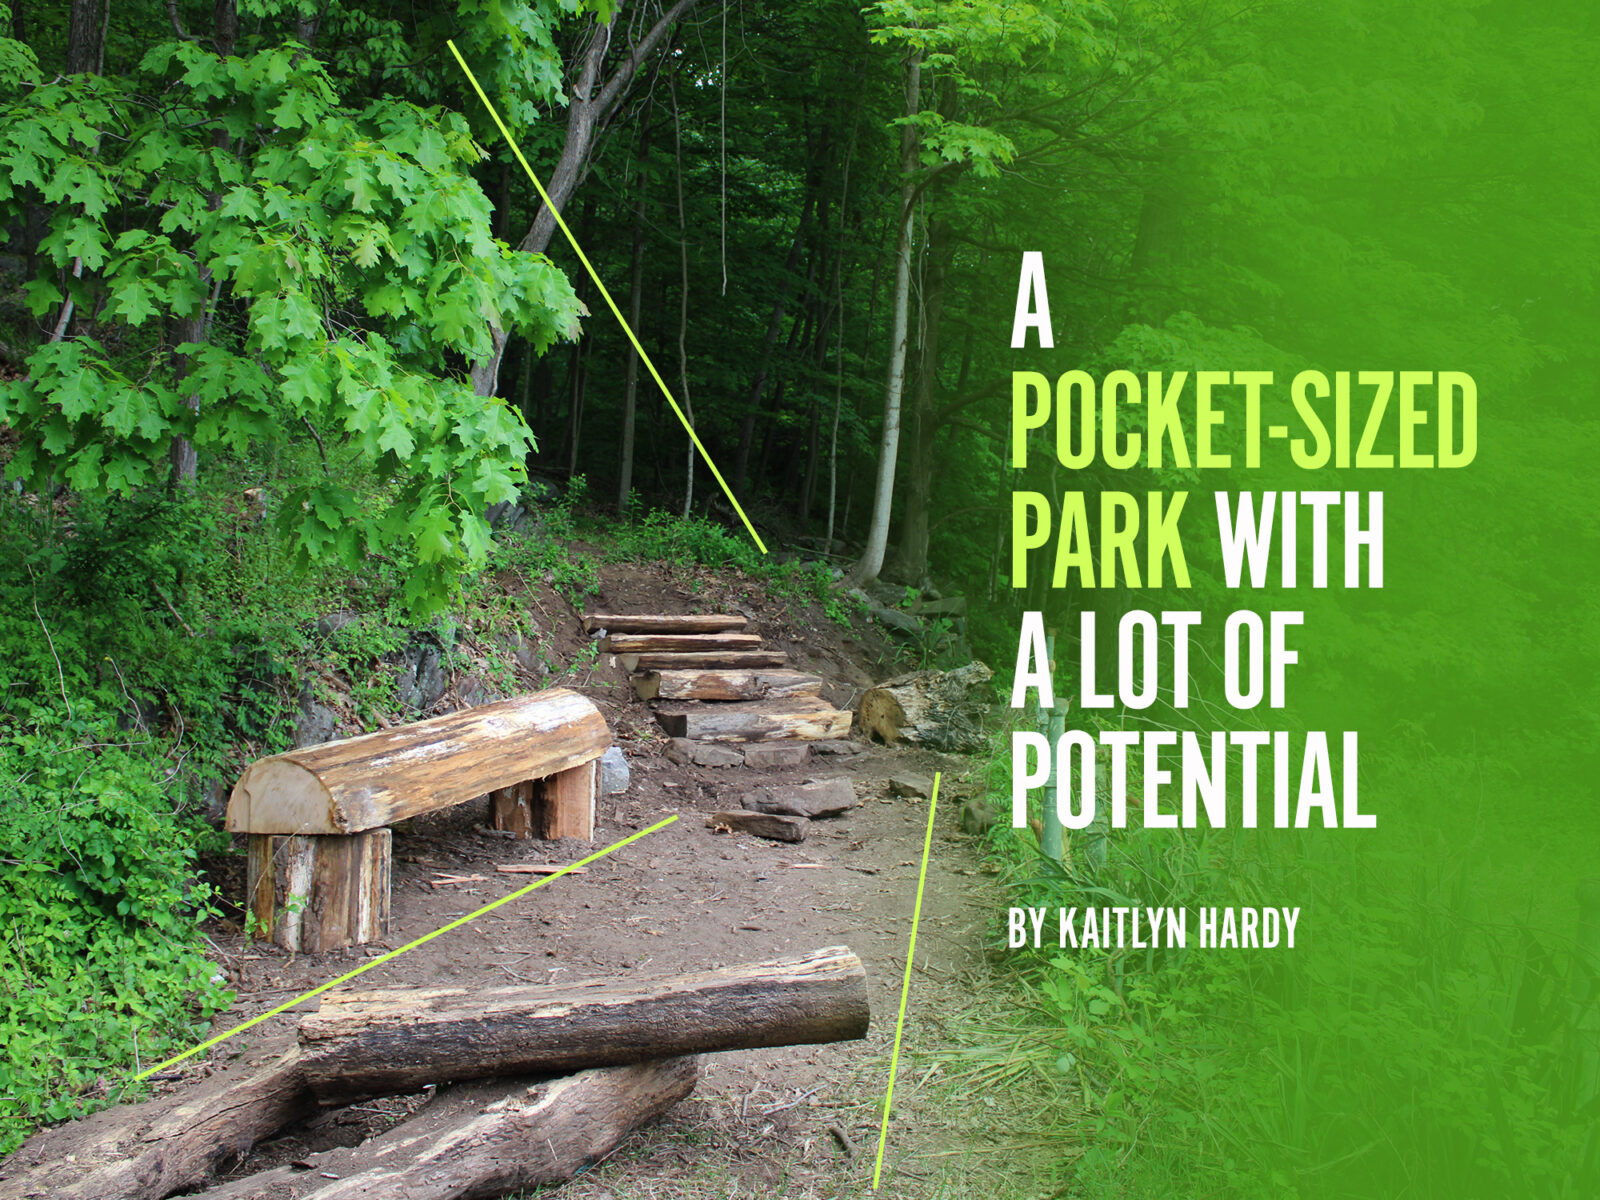 A Pocket-Sized Park with a Lot of Potential